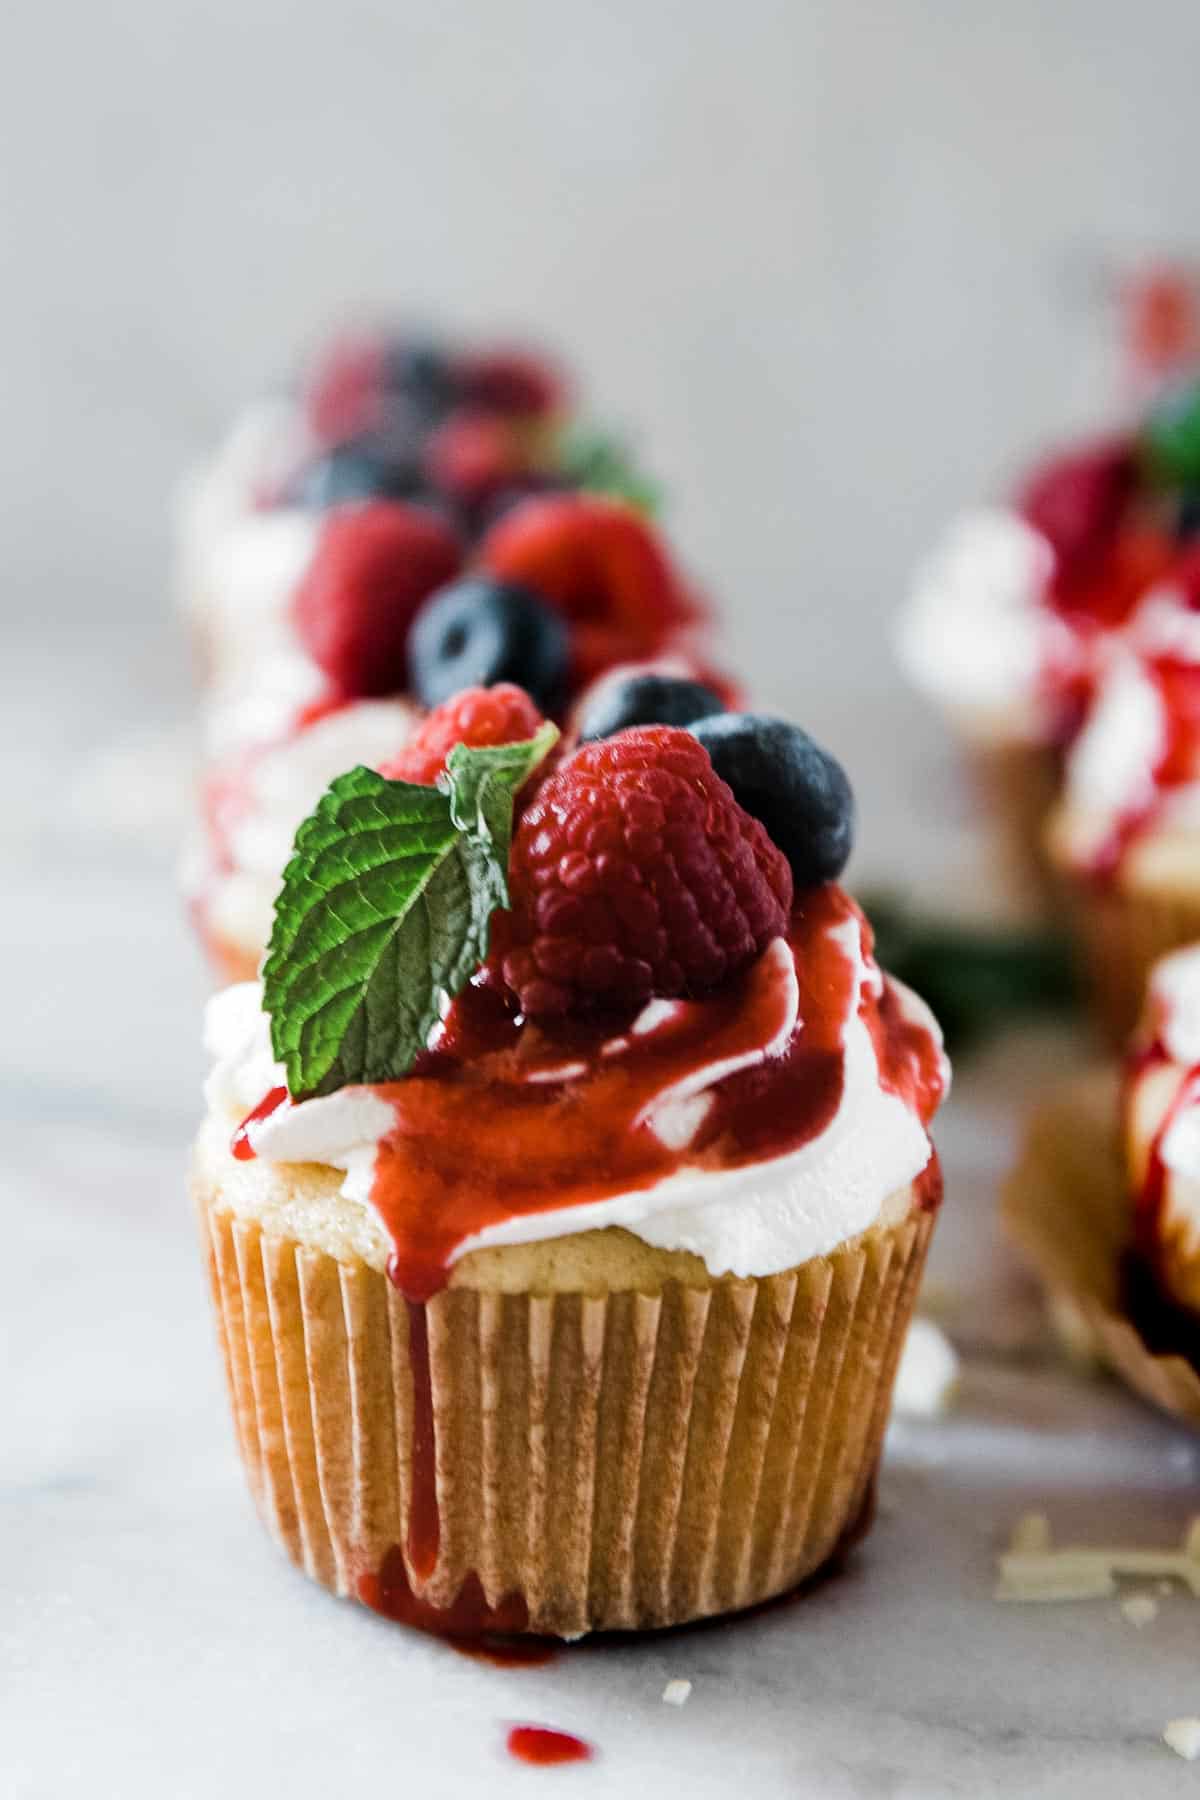 A close up of white chocolate raspberry cupcake garnished with berries and mint.